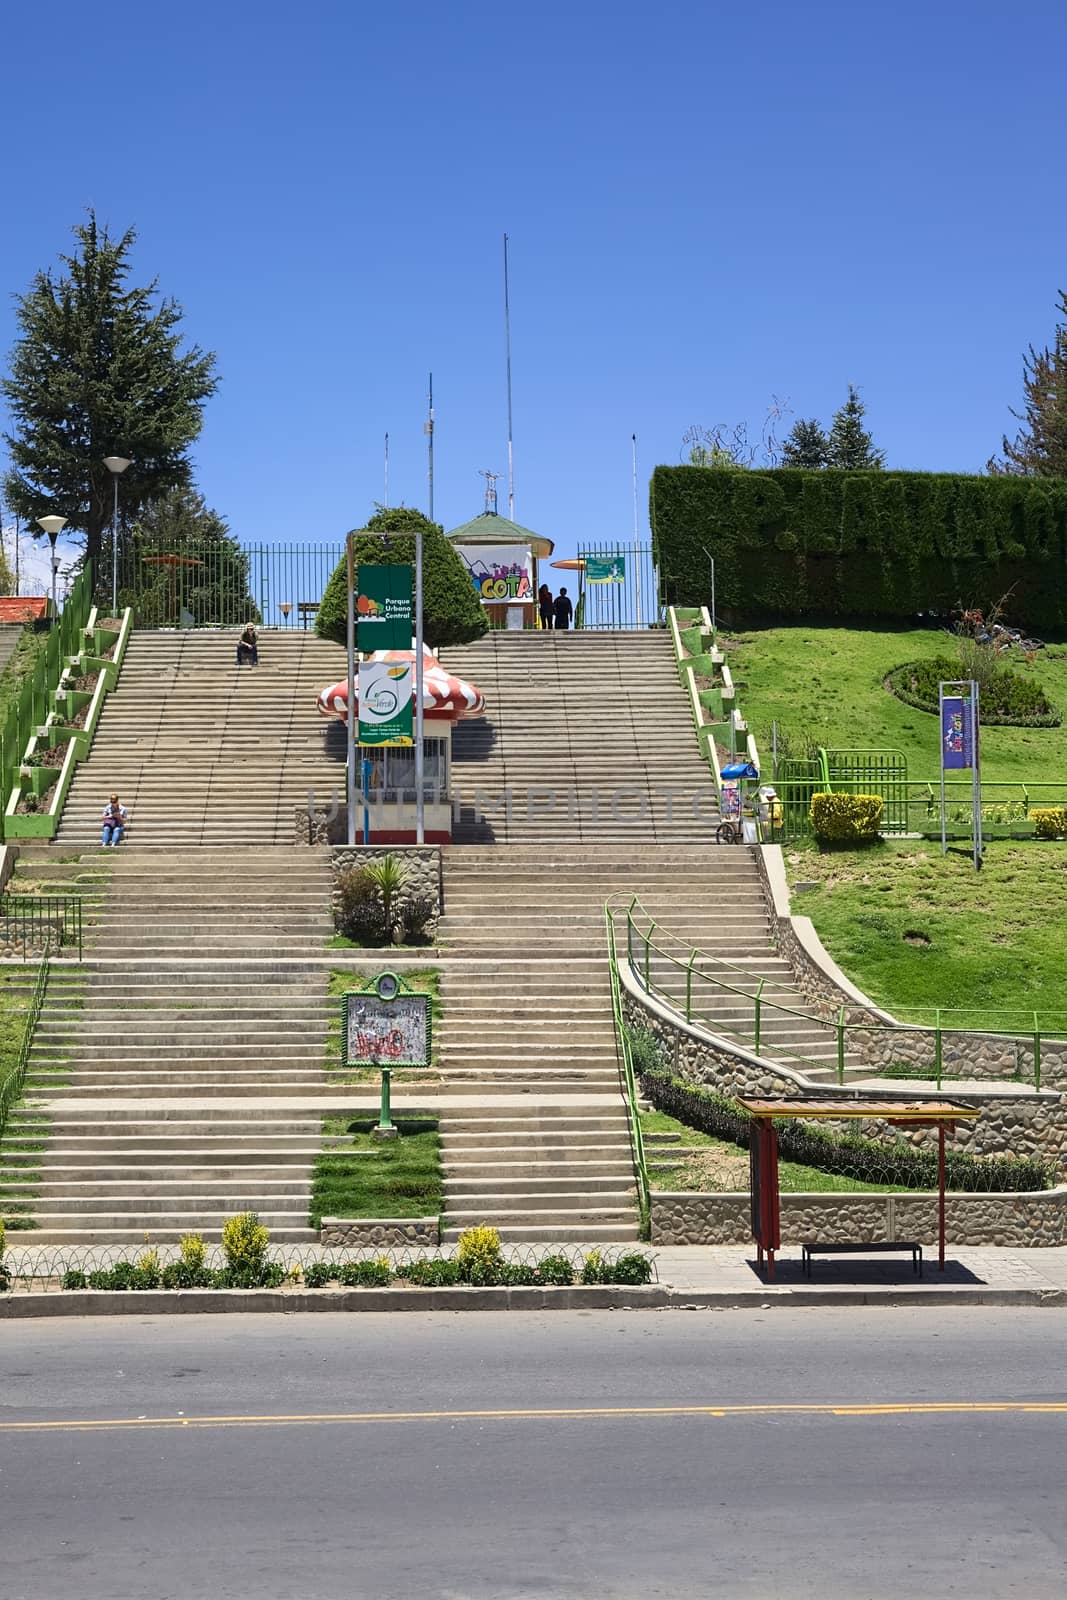 LA PAZ, BOLIVIA - OCTOBER 14, 2014: Stairs leading to the Parque Metropolitano Laikacota (metropolitan park), a playground and lookout, located in the Parque Urbano Central (Central Urban Park) on October 14, 2014 in La Paz, Bolivia 